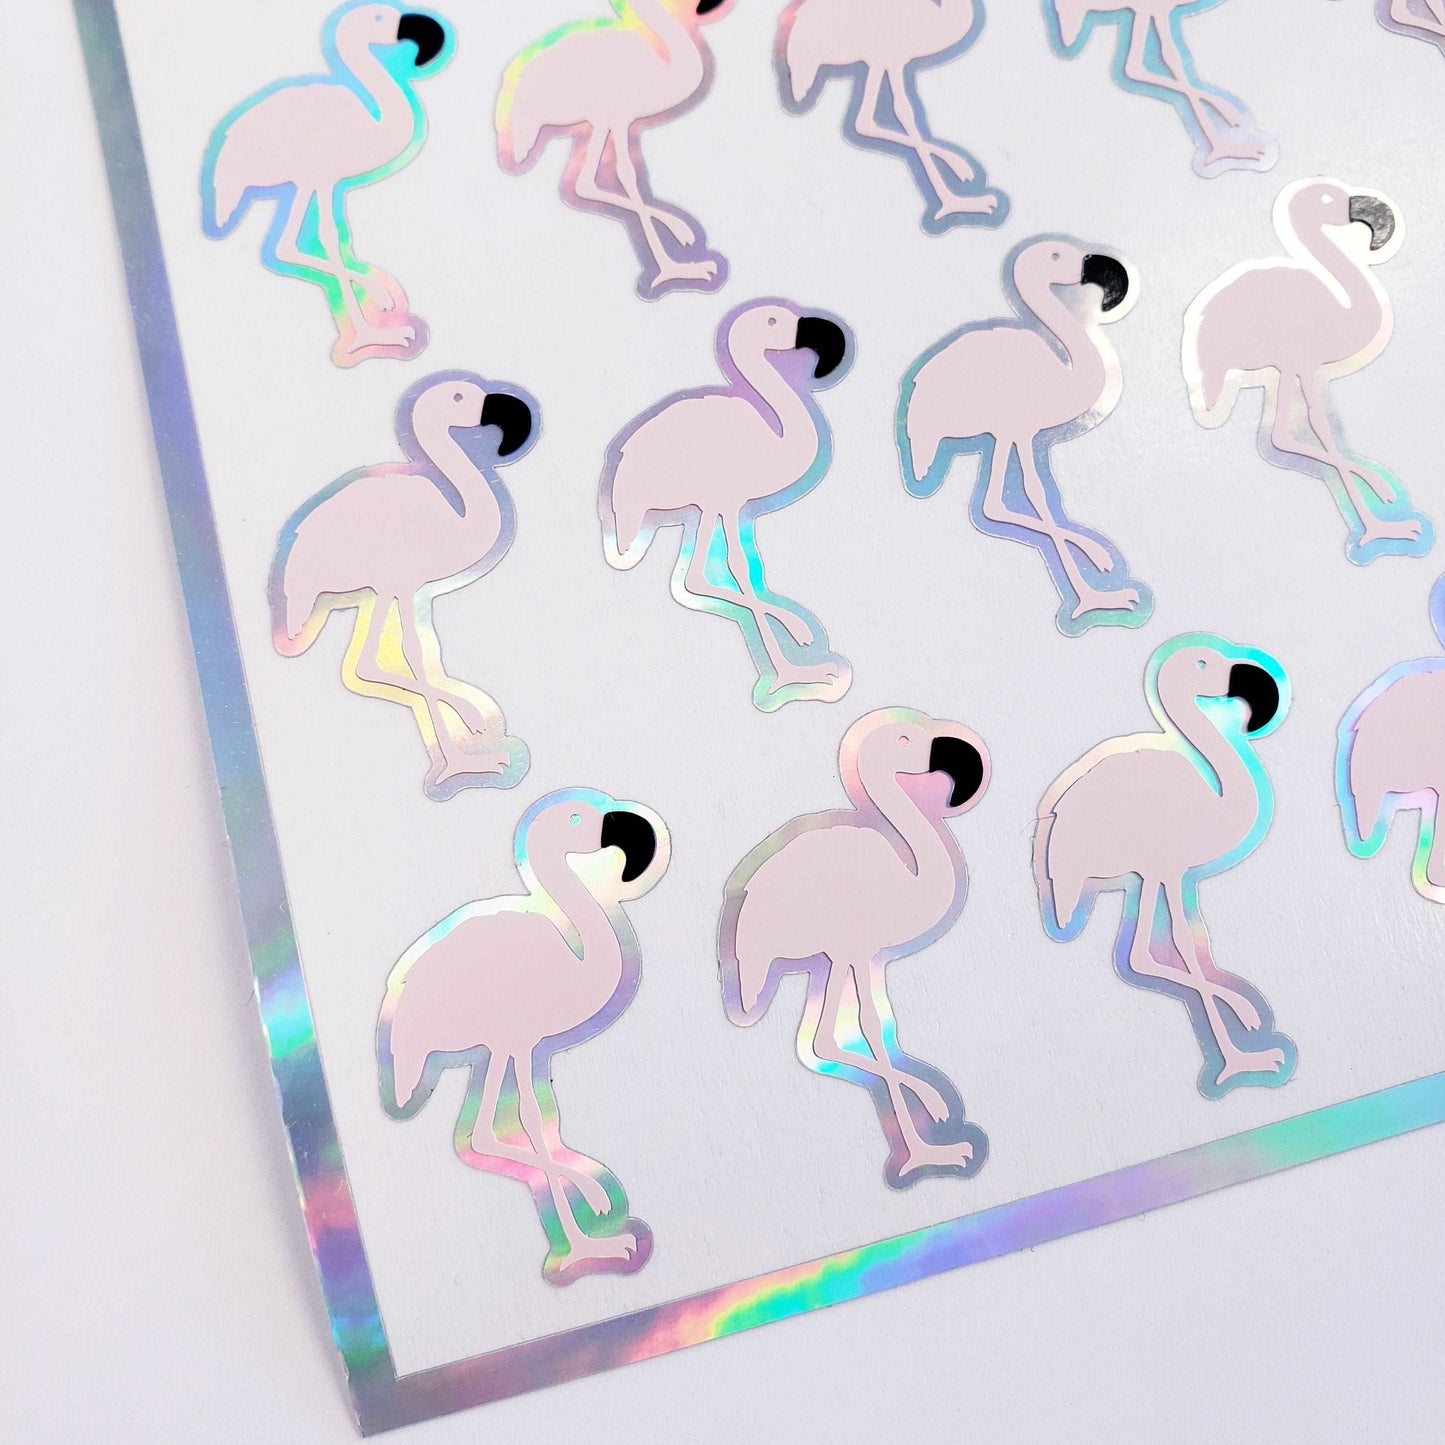 Flamingo Stickers, set of 25 blush pink and silver bird stickers for tropical themed parties, weddings and baby showers. Waterproof decals.